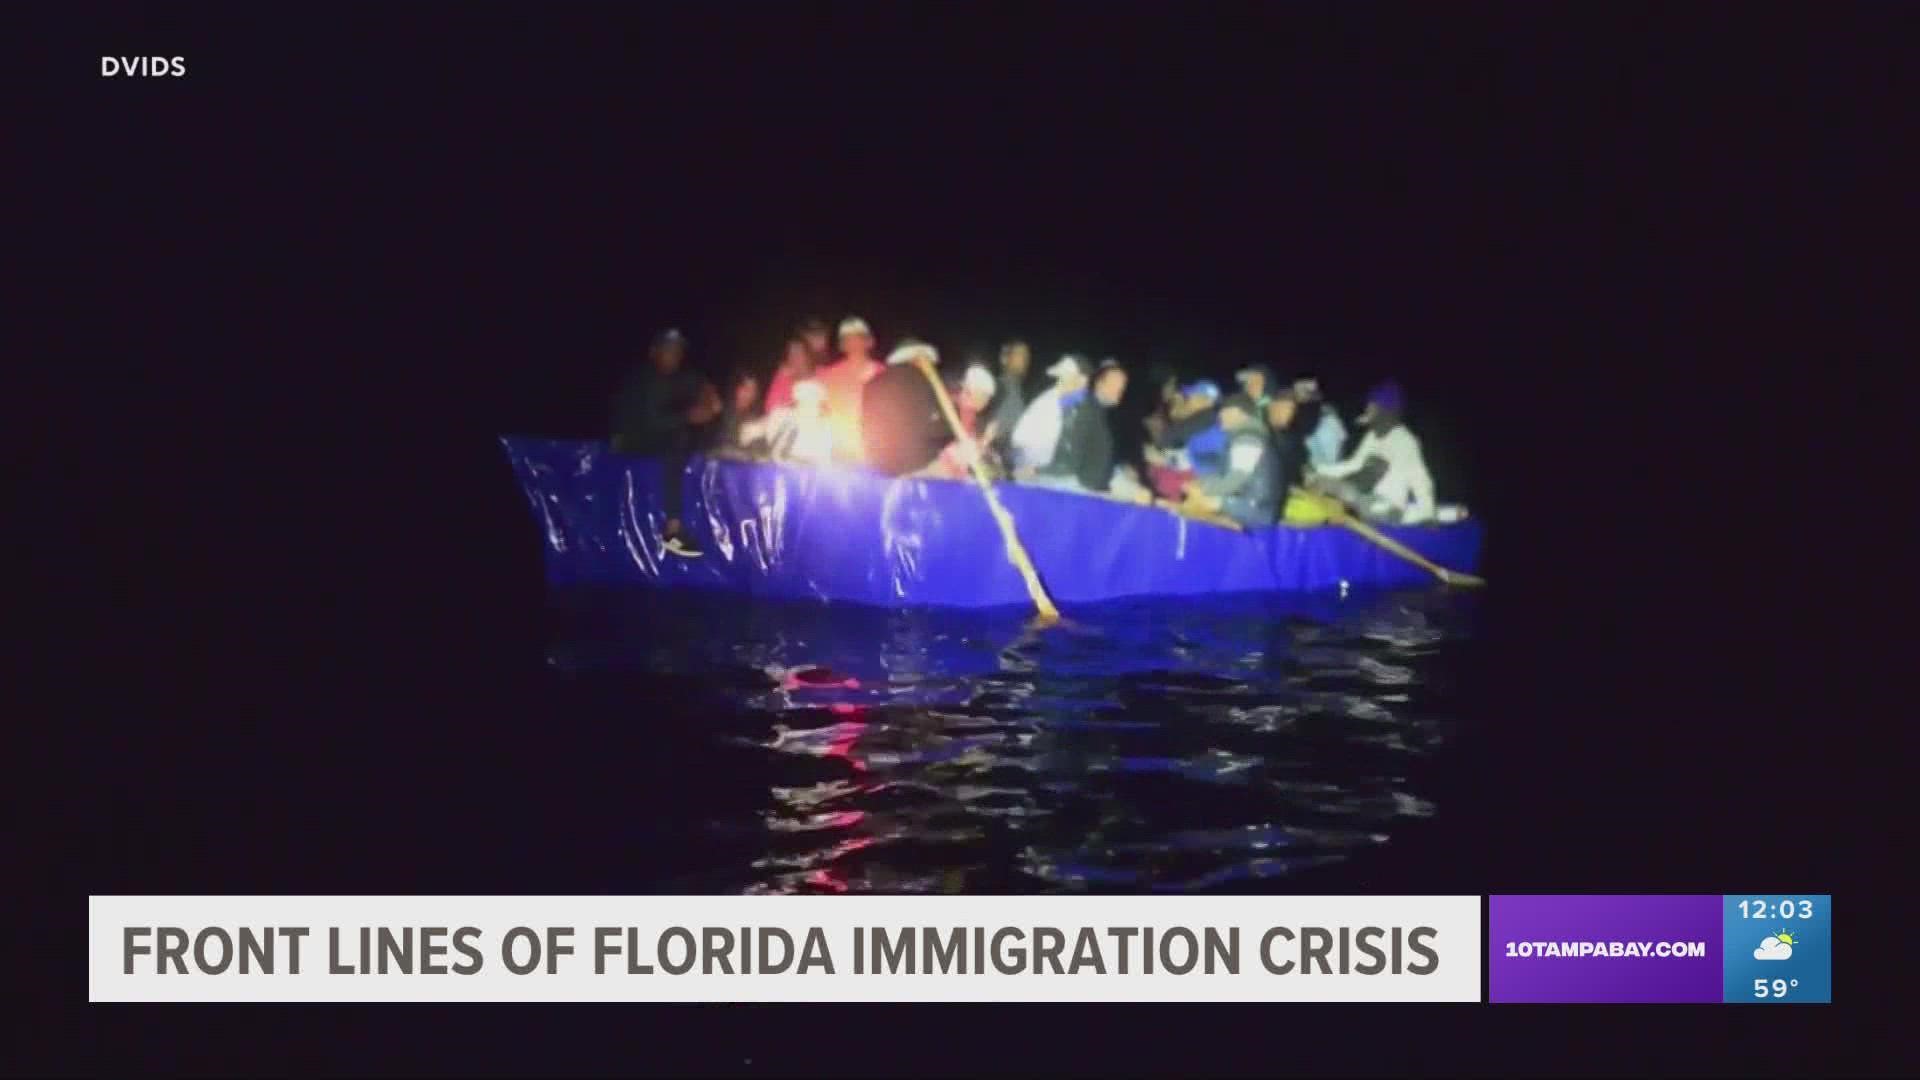 Hundreds of migrants fleeing Cuba and Haiti have made the dangerous 100-mile journey by boat to the Florida Keys.